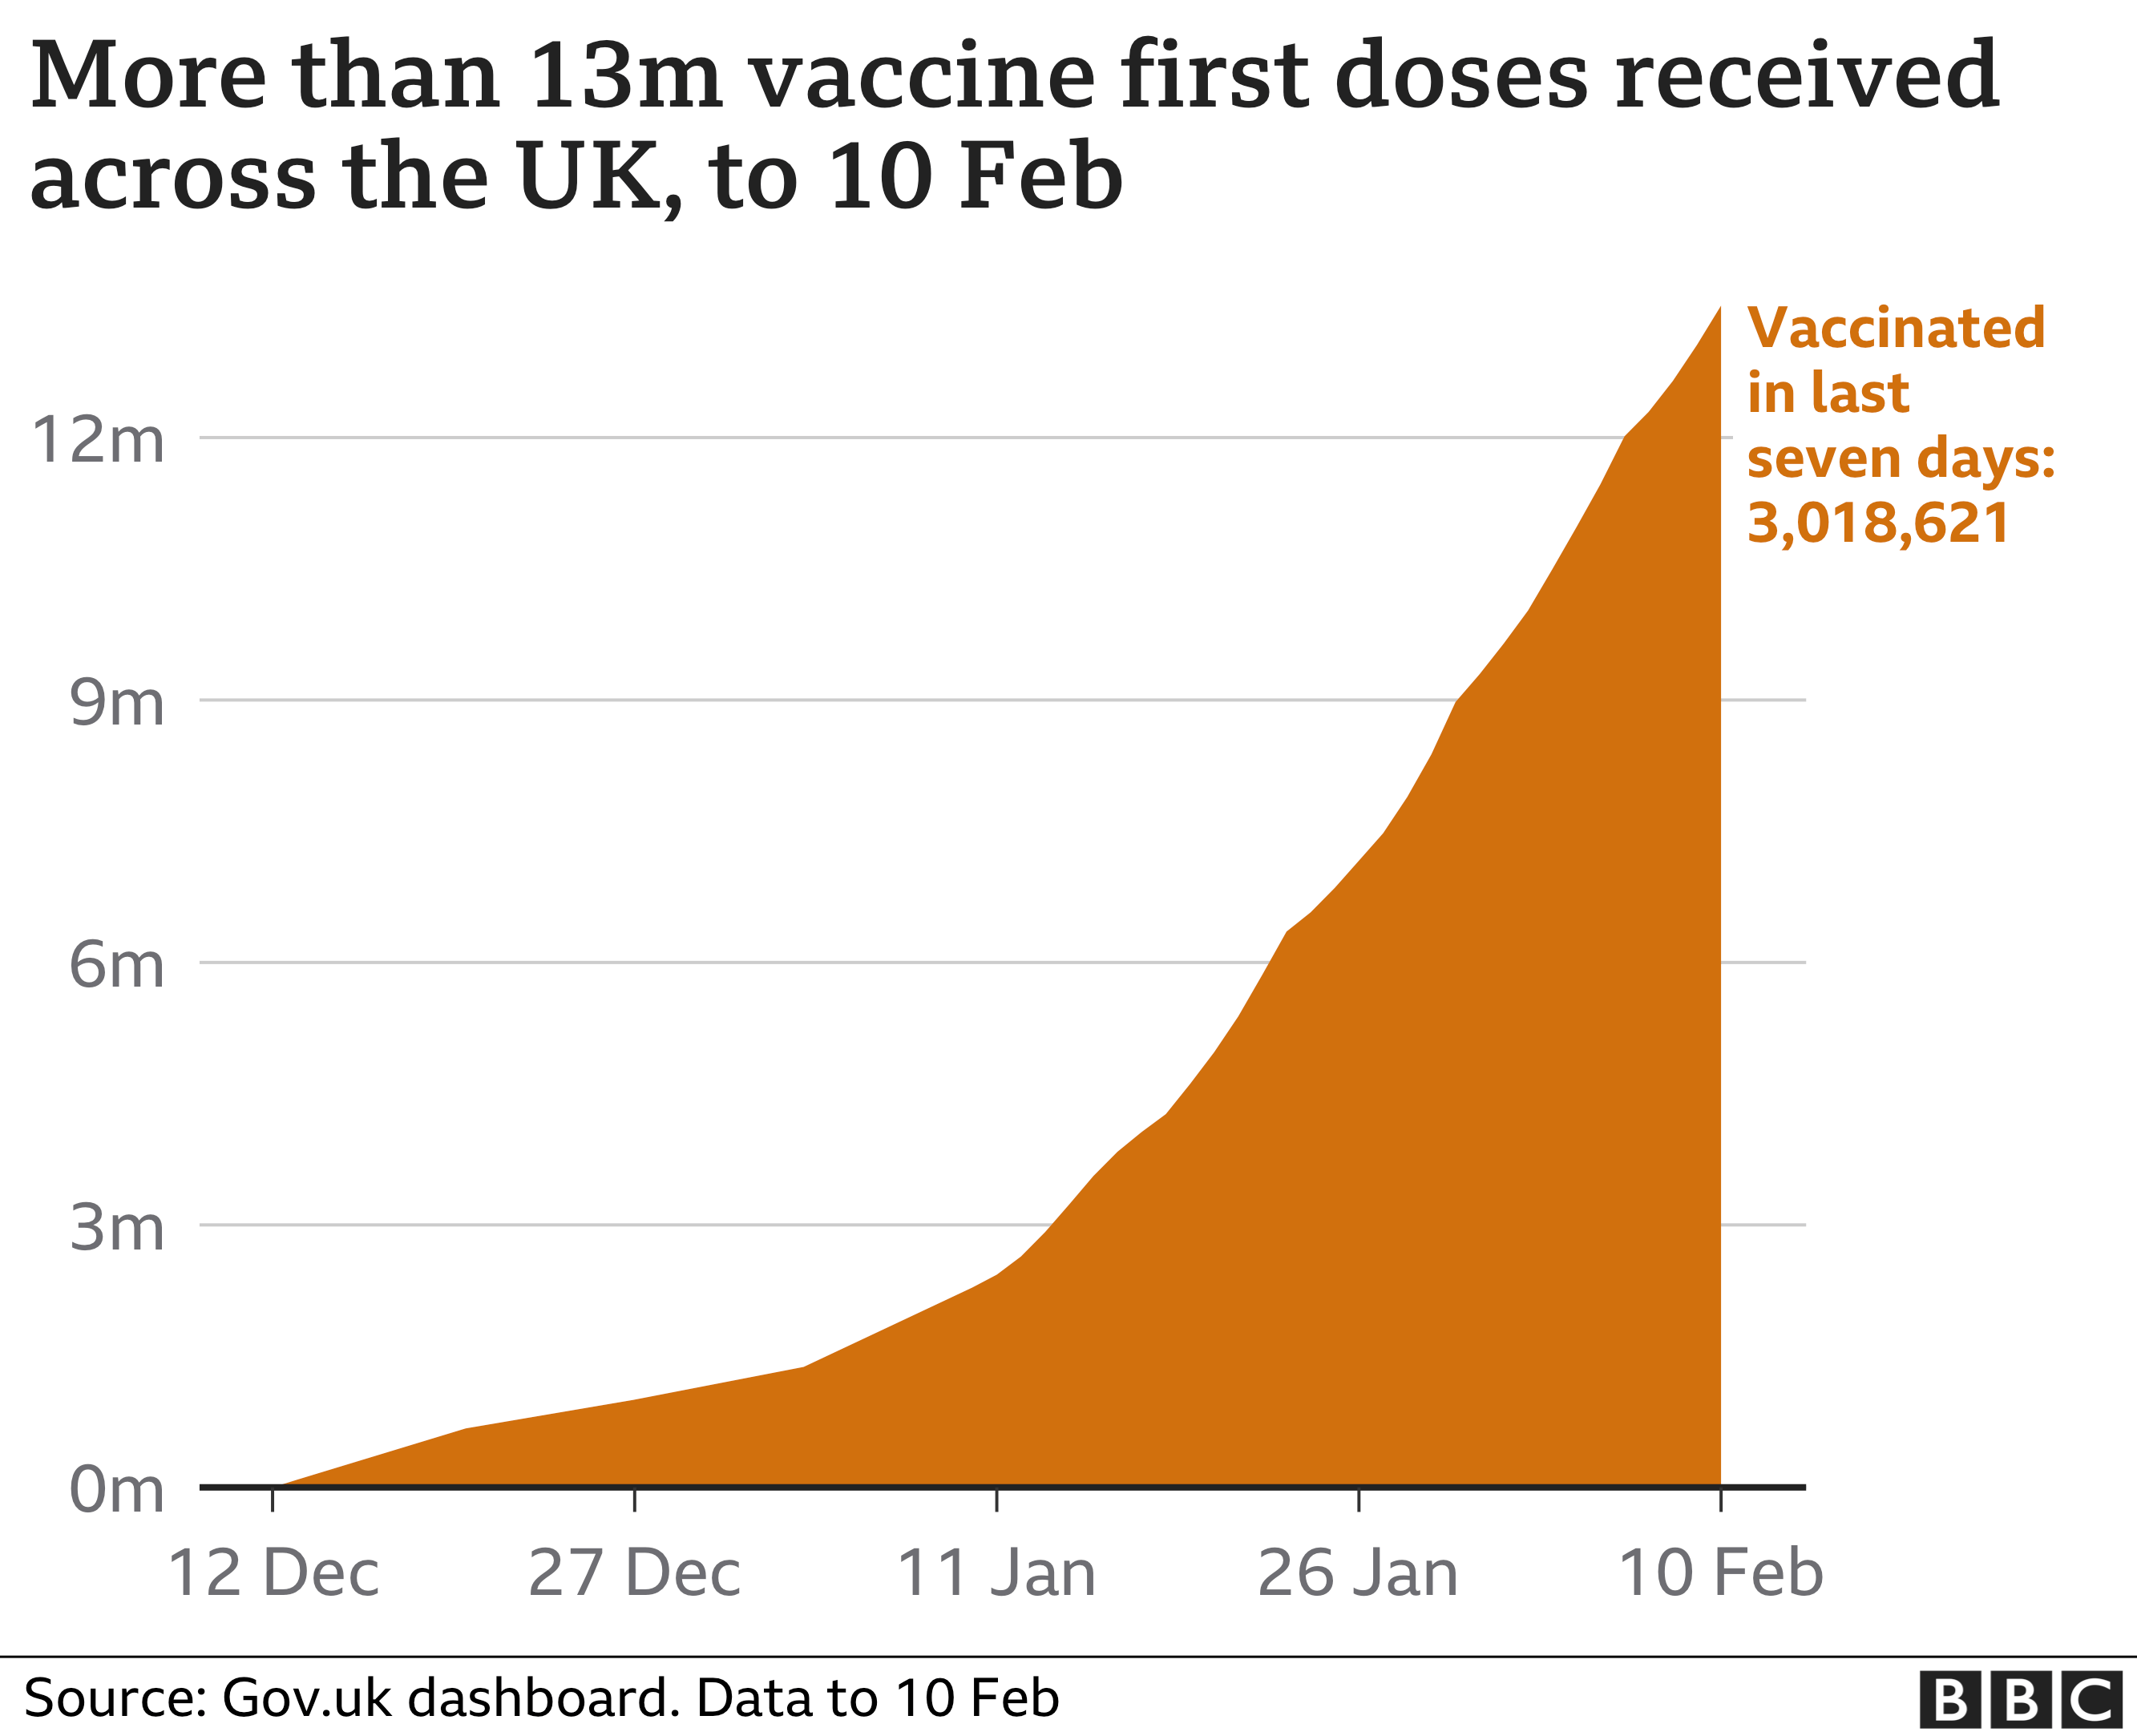 Chart showing vaccine first doses received across the UK